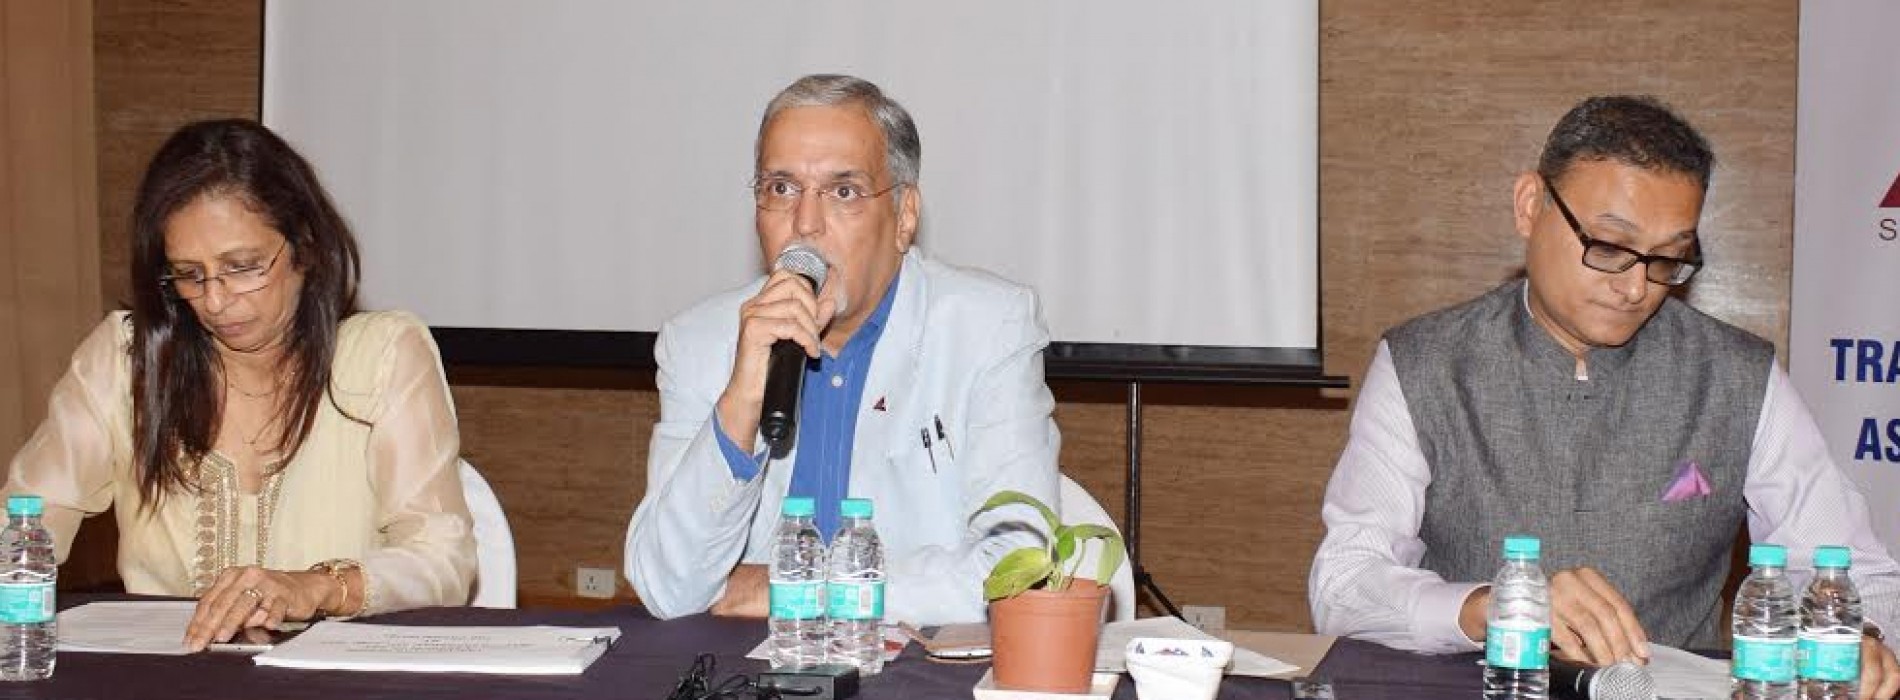 TAAI conducts session on GST for its members across India